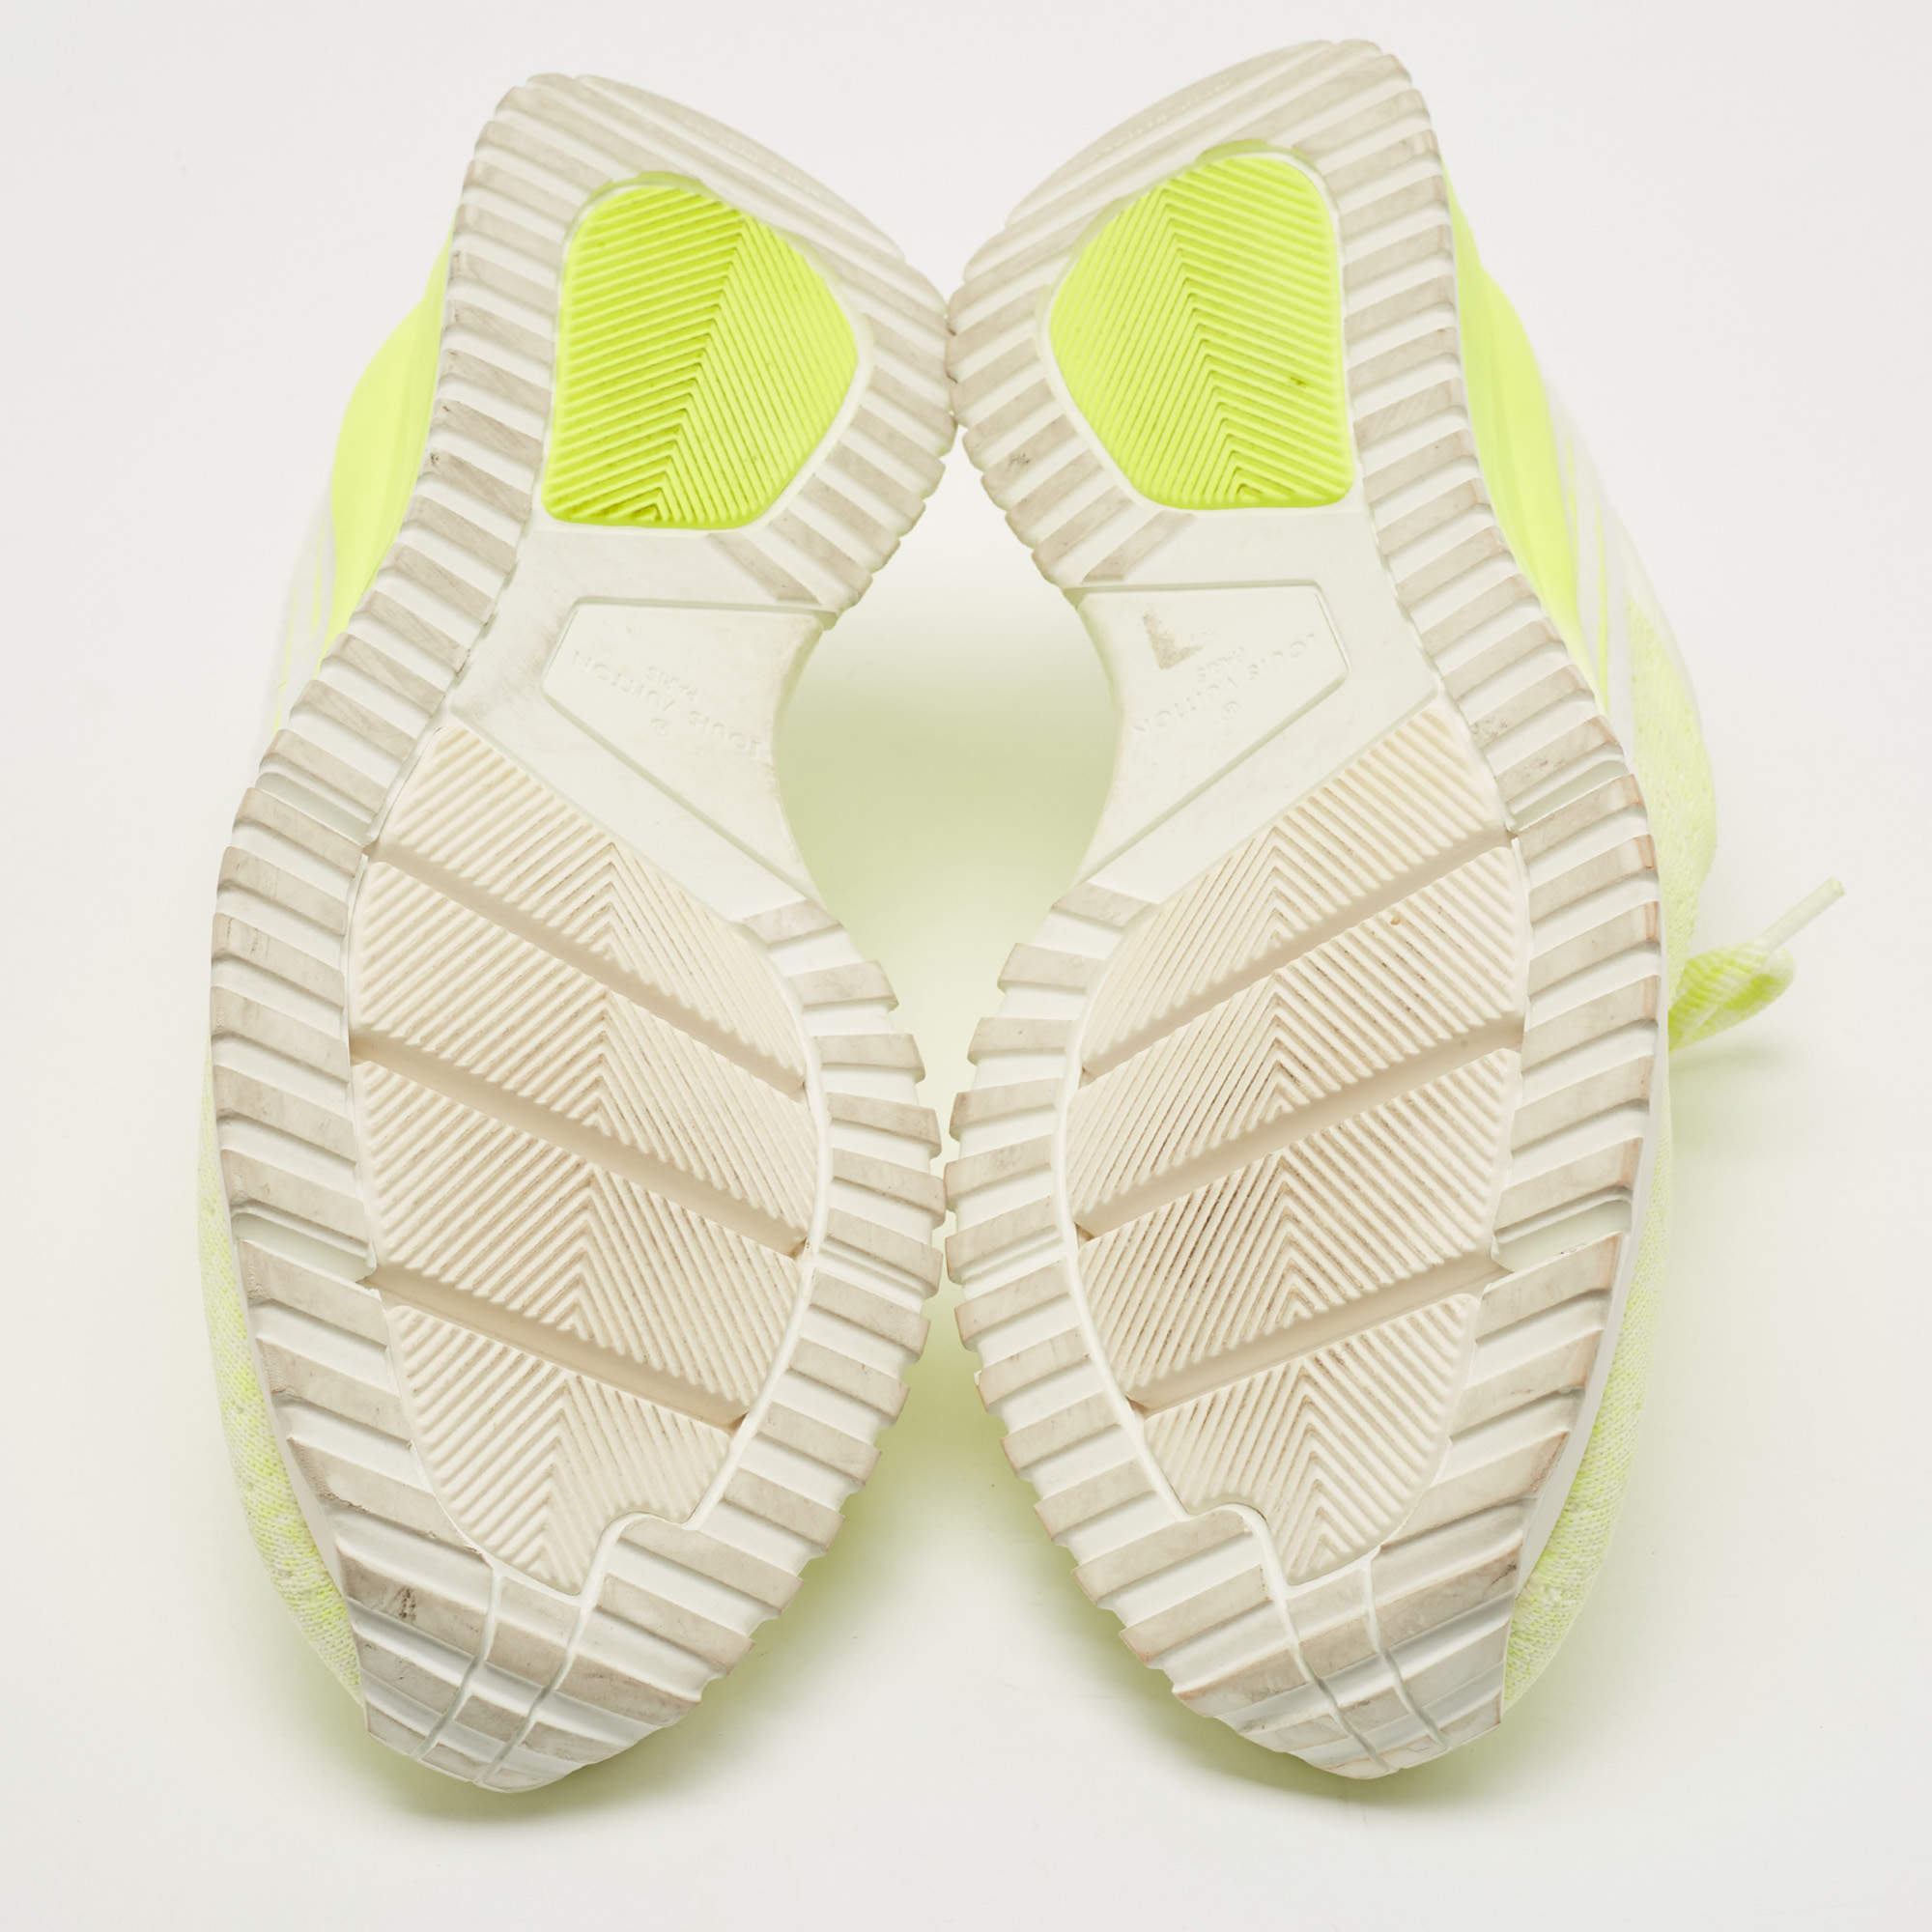 Louis Vuitton Neon Yellow Knit Fabric V.N.R Sneakers Size 41 at 1stDibs